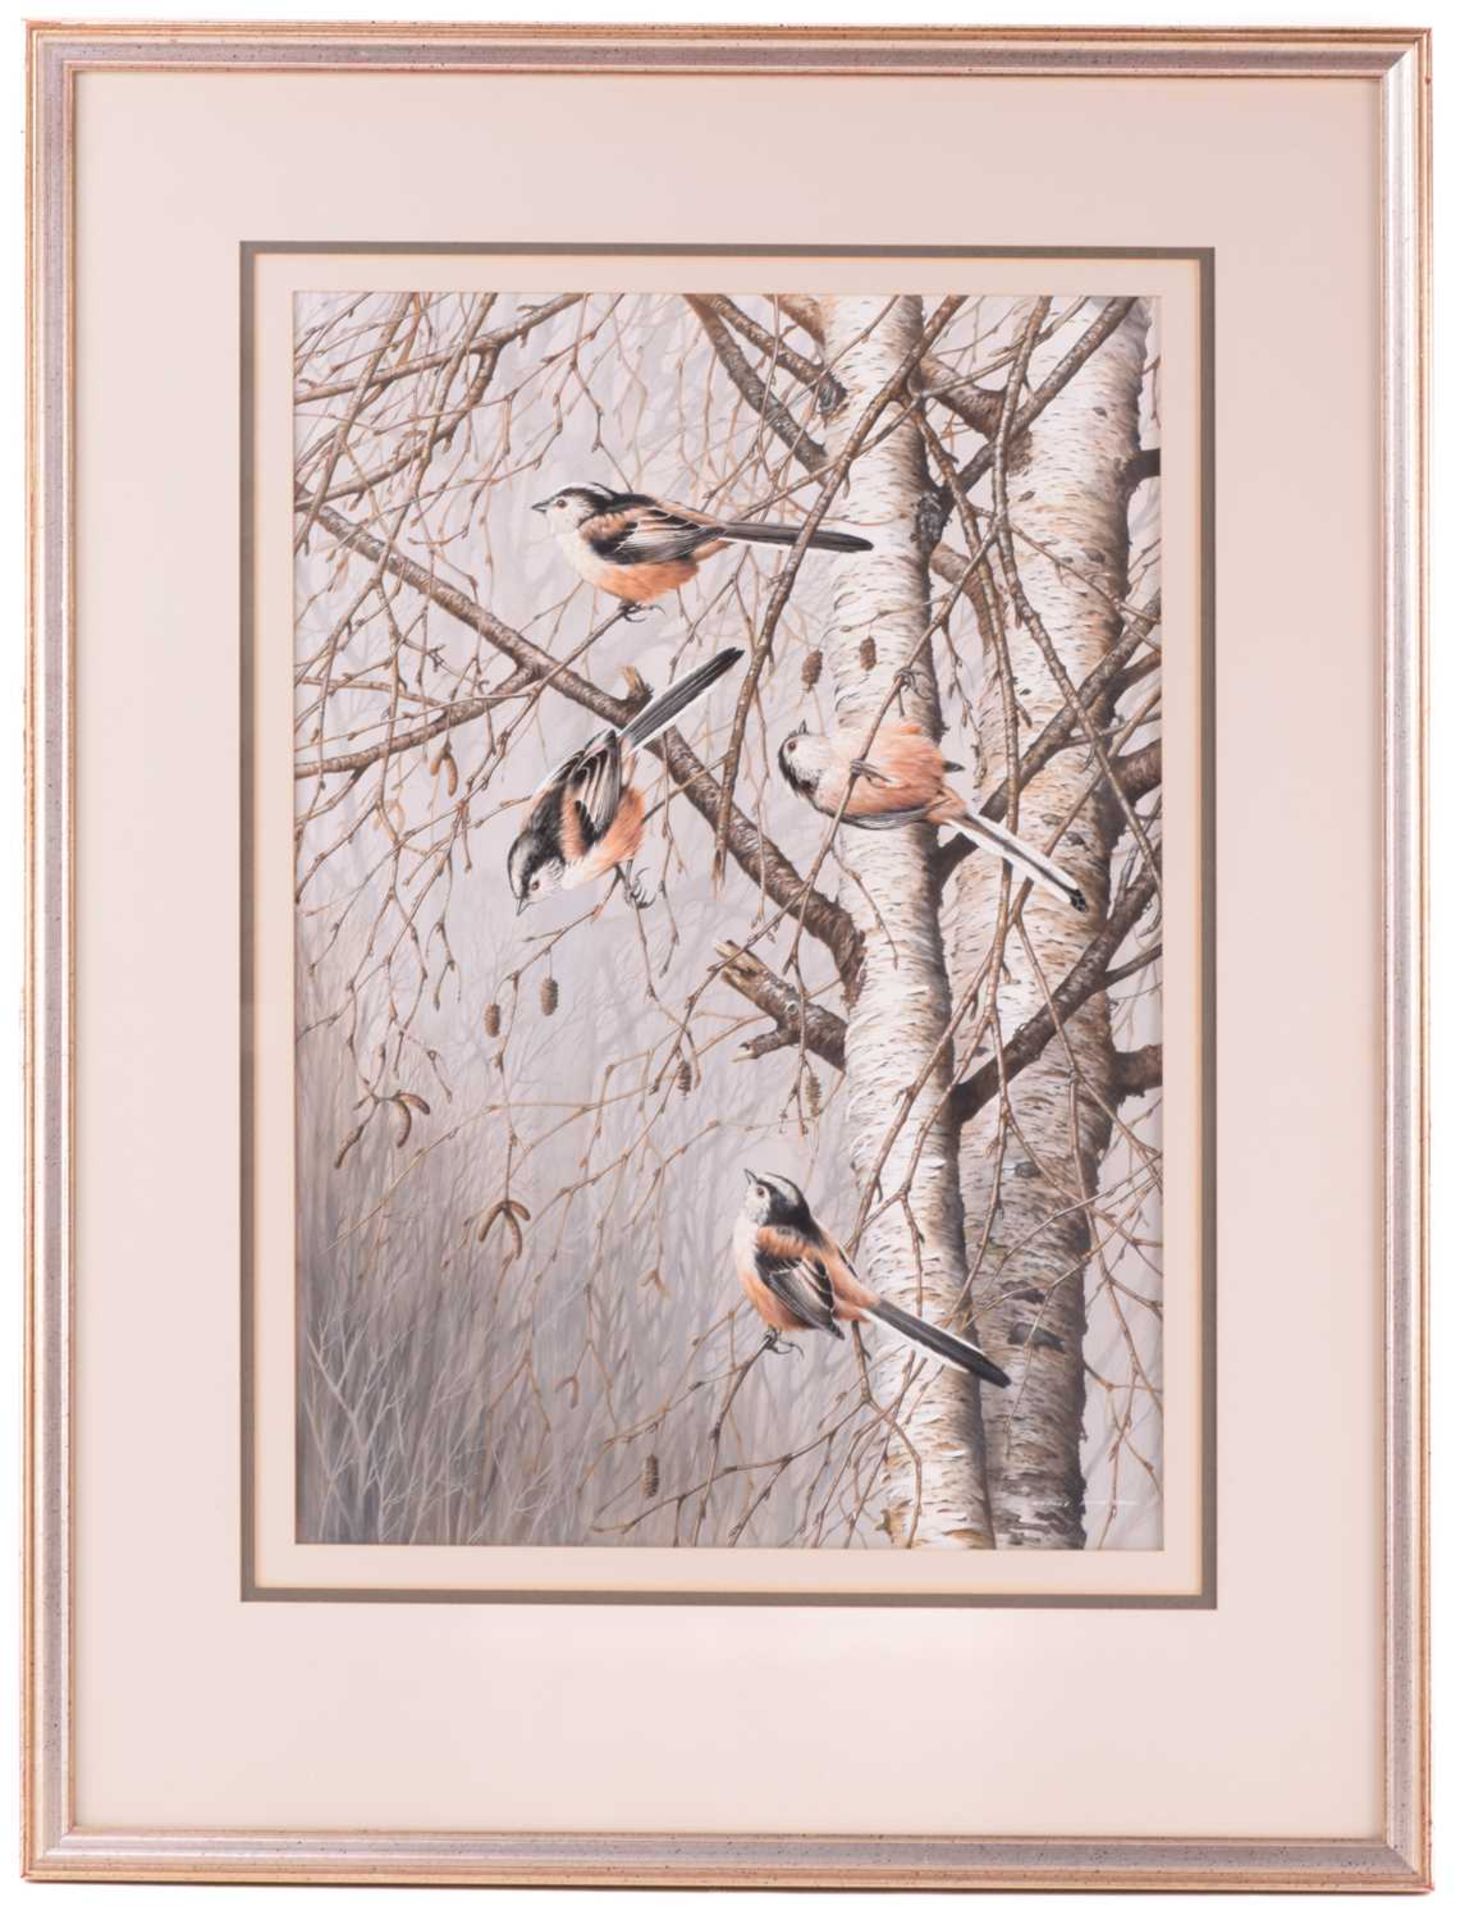 Terance James Bond (b.1946) British, 'Long Tailed Titmice', a group of four birds in a tree, - Image 2 of 9